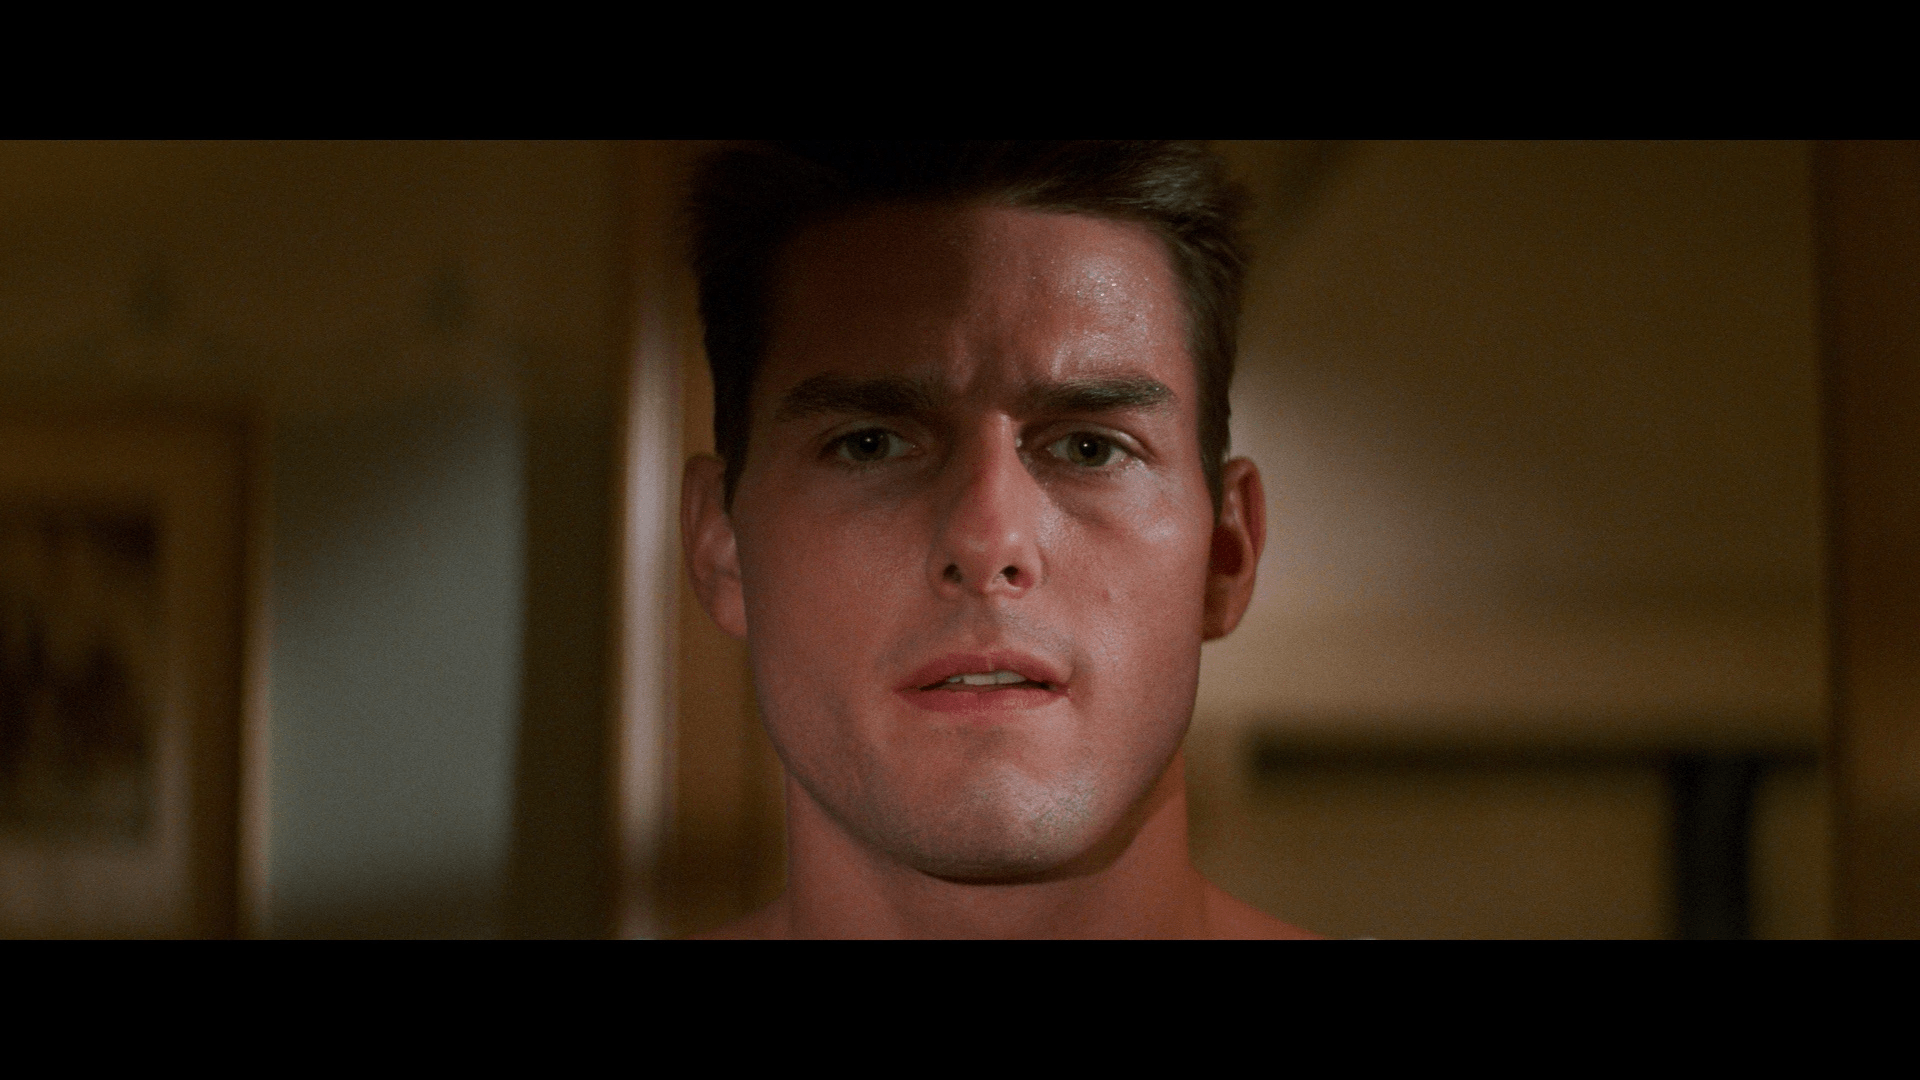 Mission Impossible turns 25 with an improved Blu-ray [Review] 16